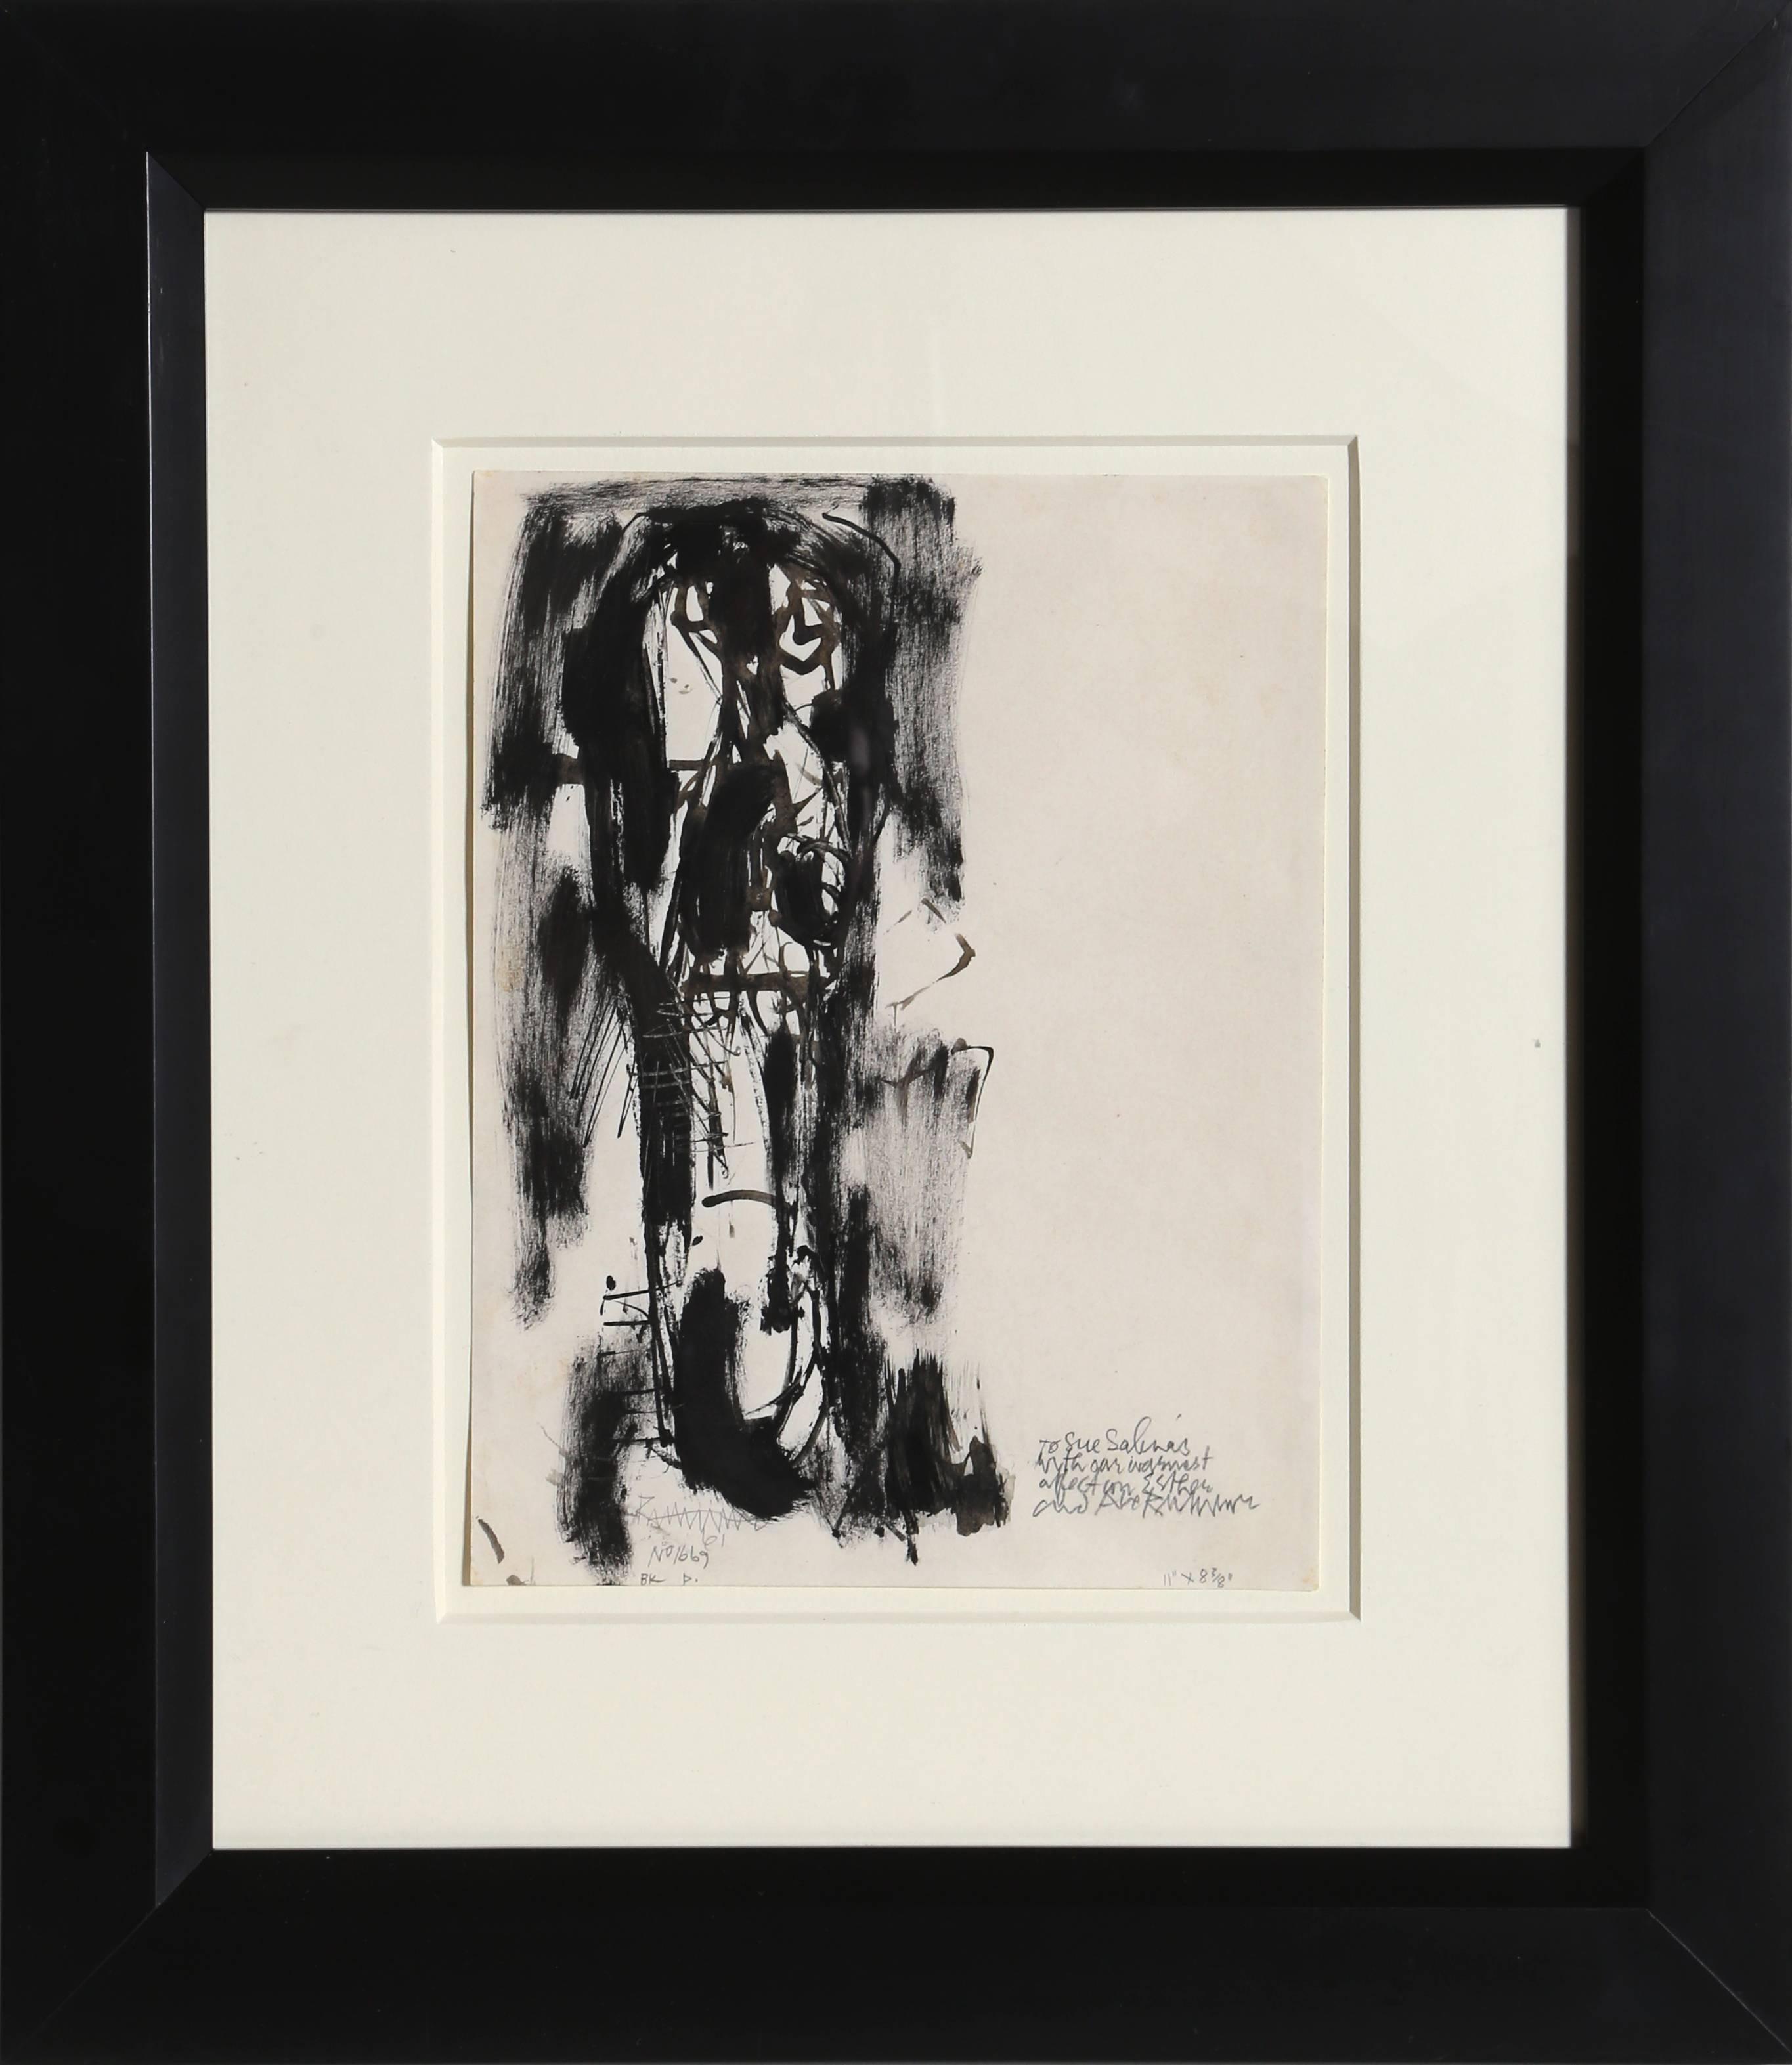 Man with Long Face, Ink and Wash on Paper by Abraham Rattner 1961